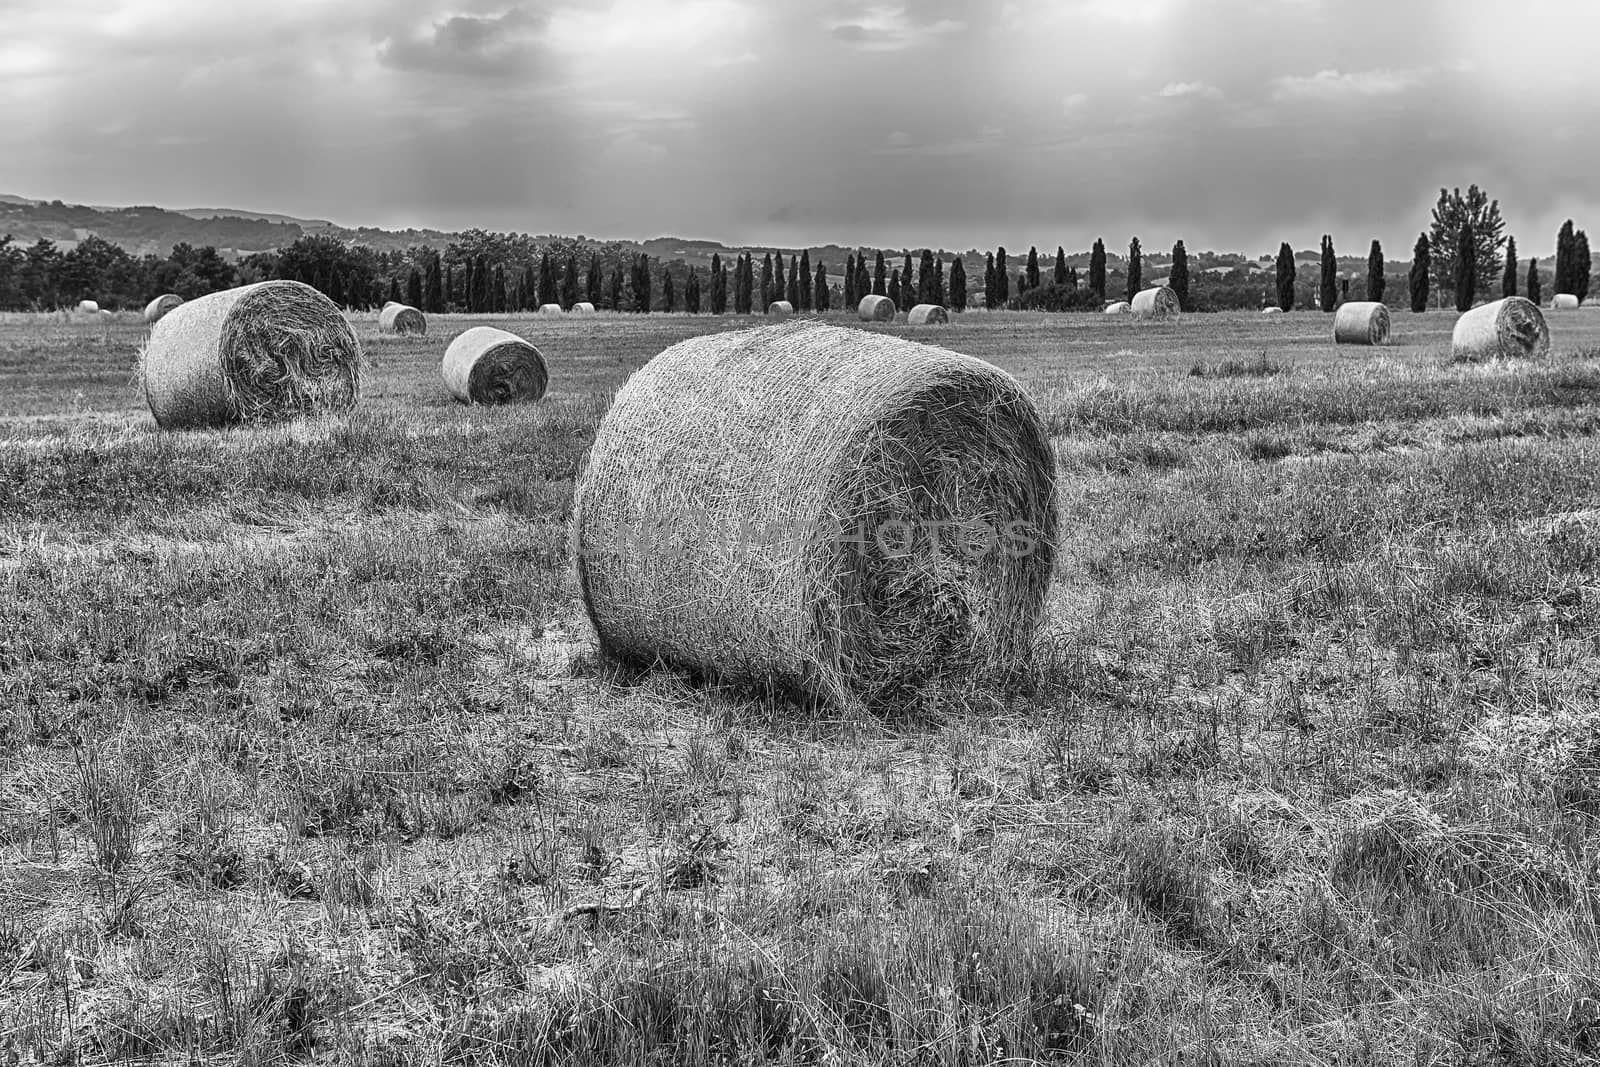 Hay bales on the field after harvest, countryside landscape in Italy